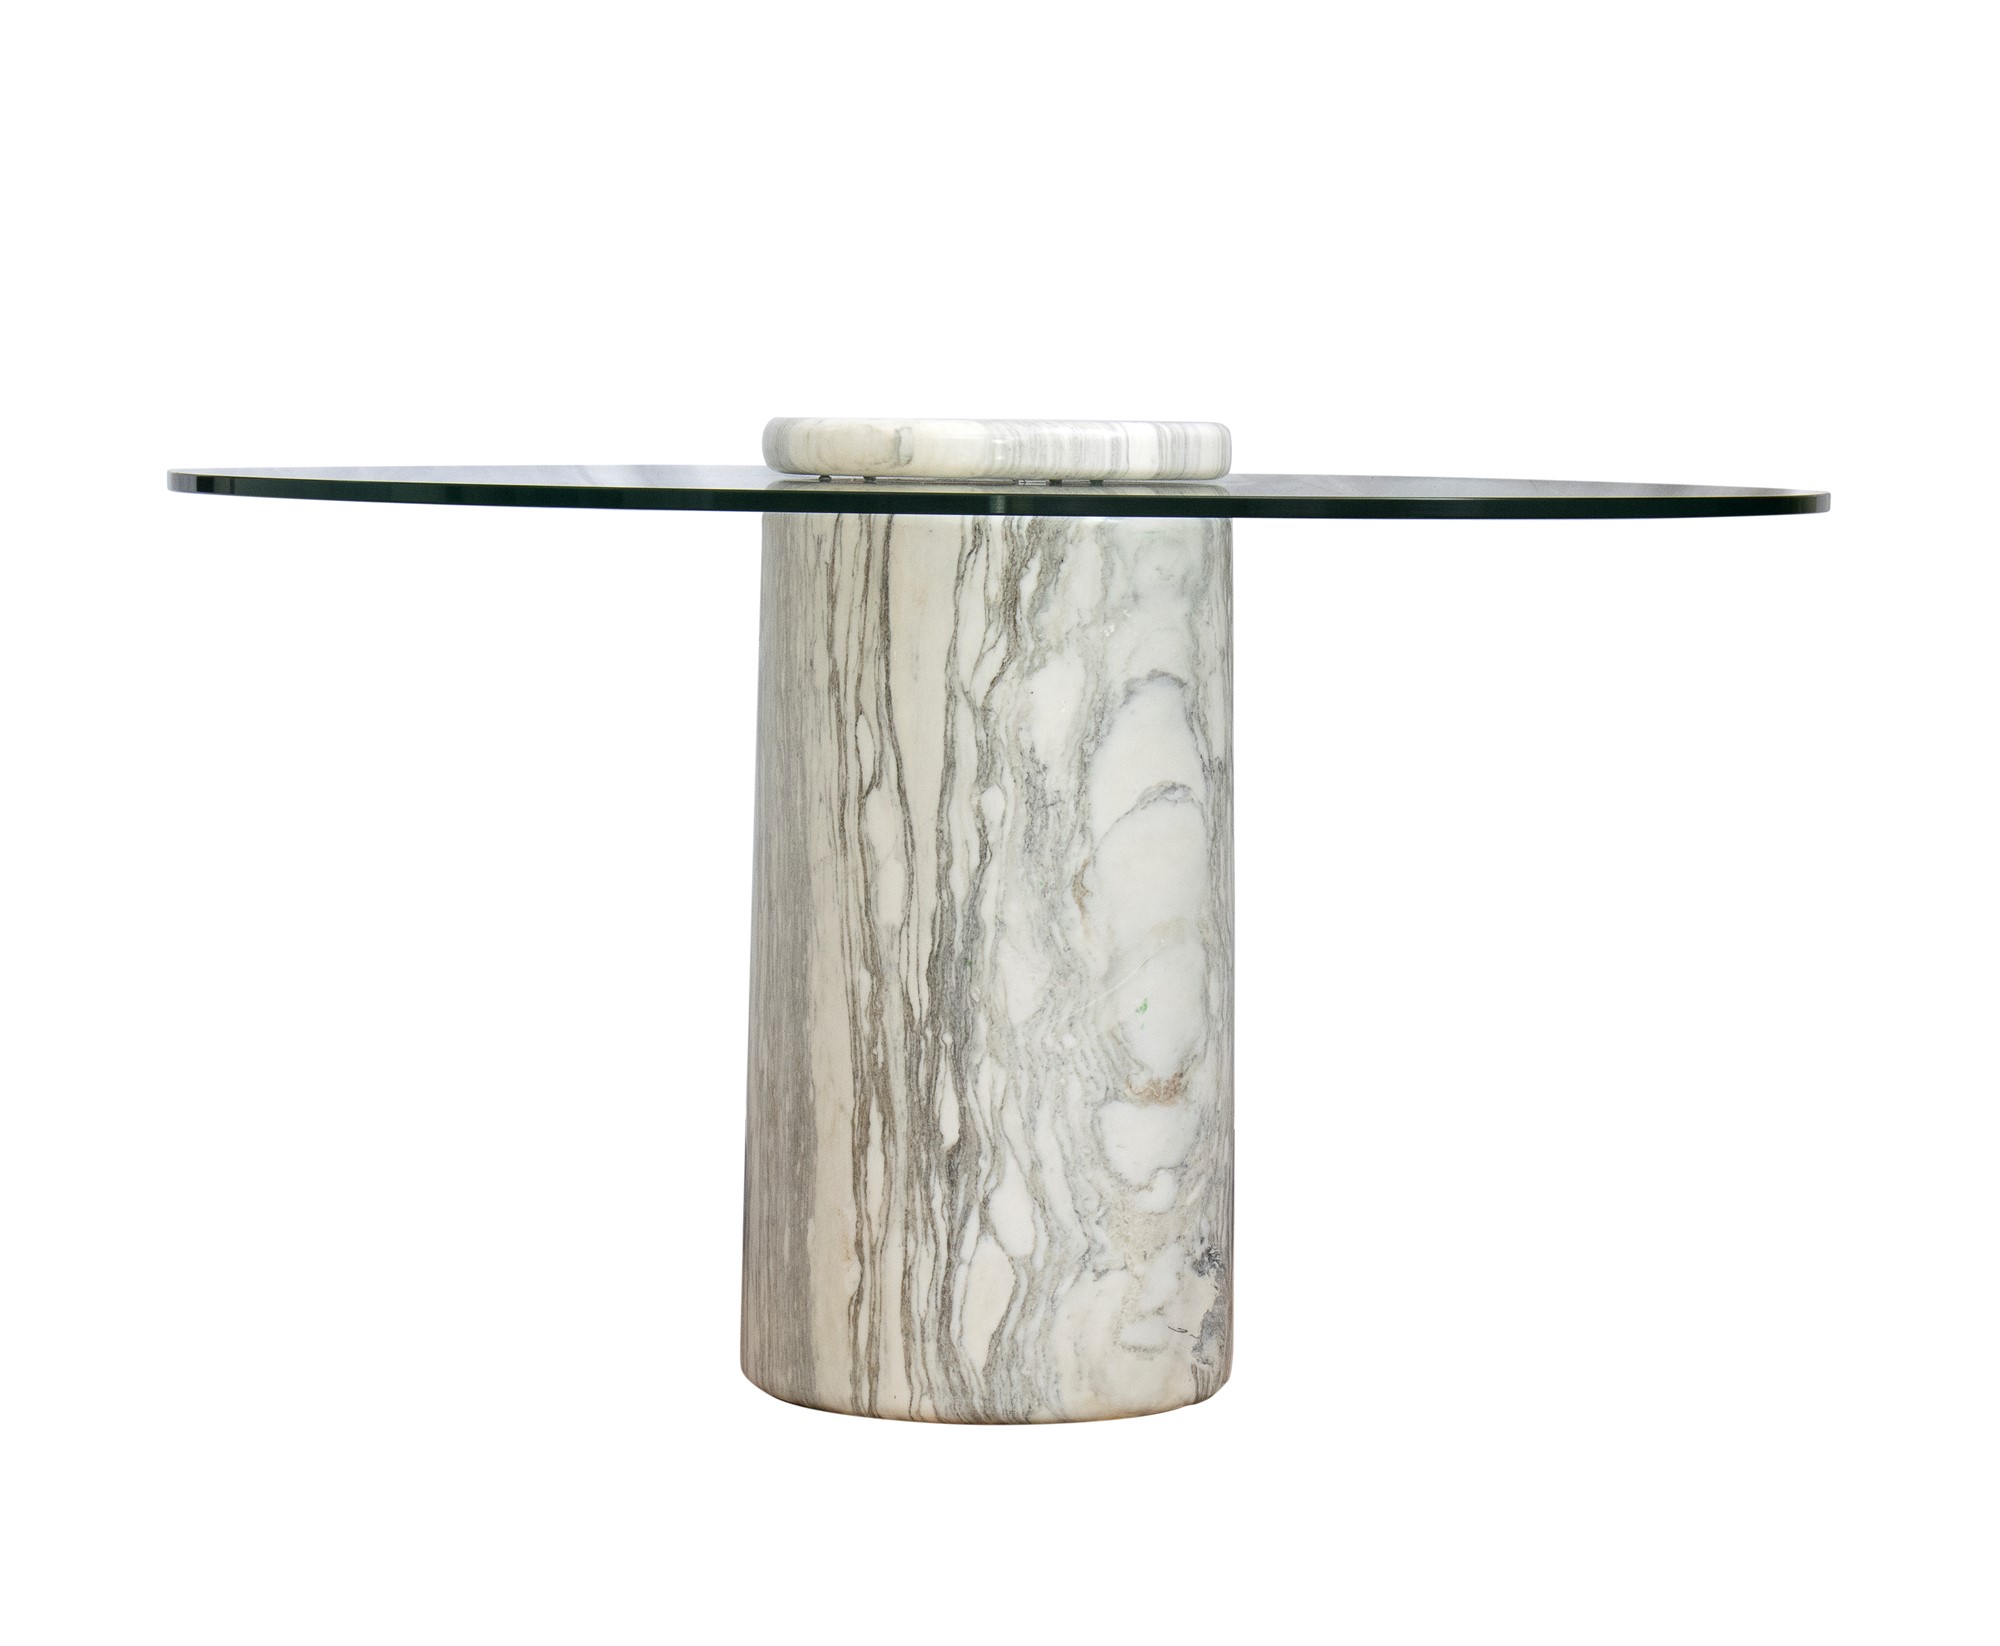 Angelo Mangiarotti Castore table in white marble and glass top - Image 5 of 7